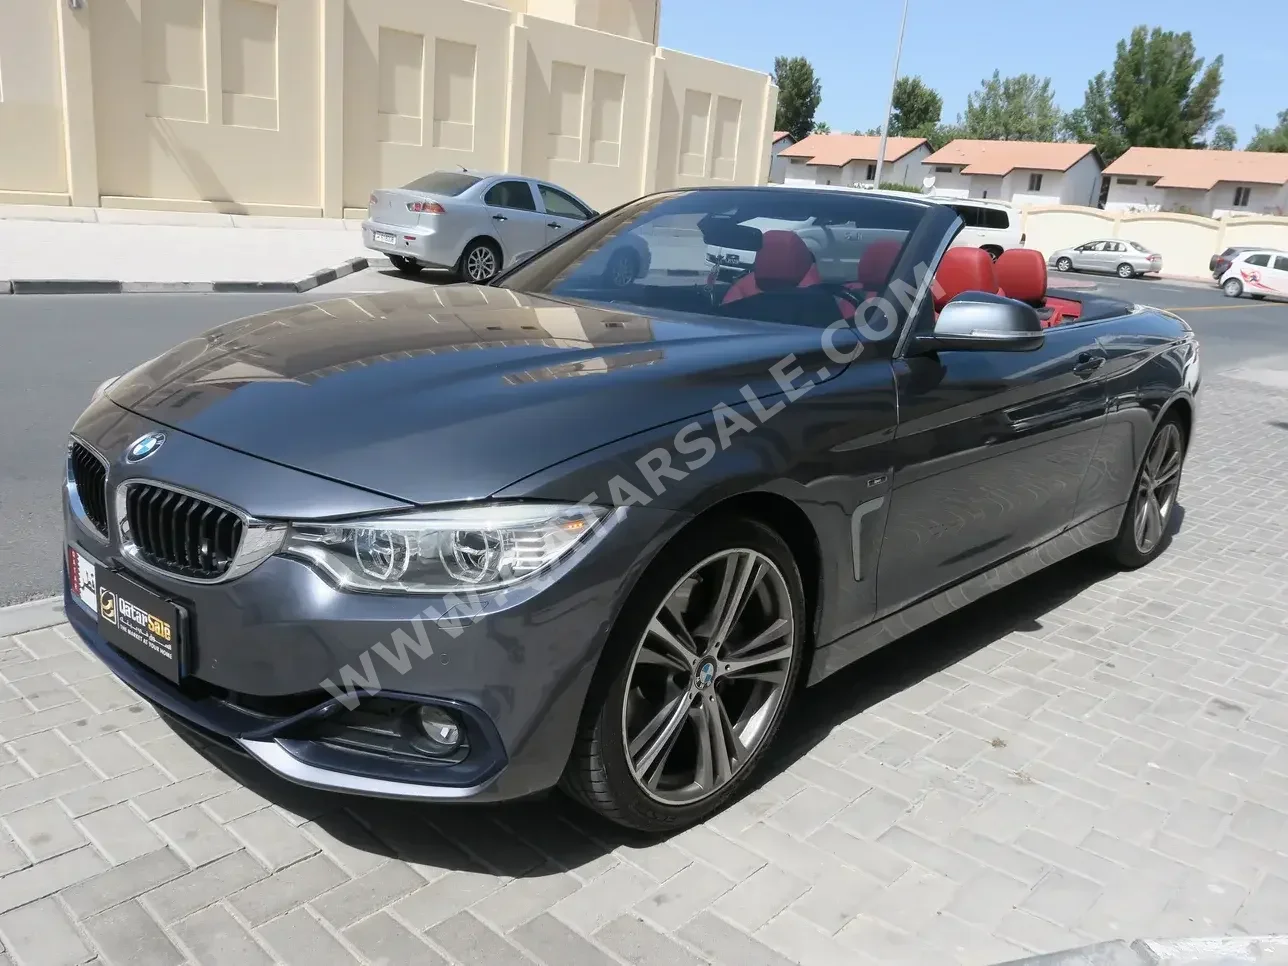 BMW  4-Series  435 I  2016  Automatic  122,000 Km  6 Cylinder  Rear Wheel Drive (RWD)  Convertible  Gray